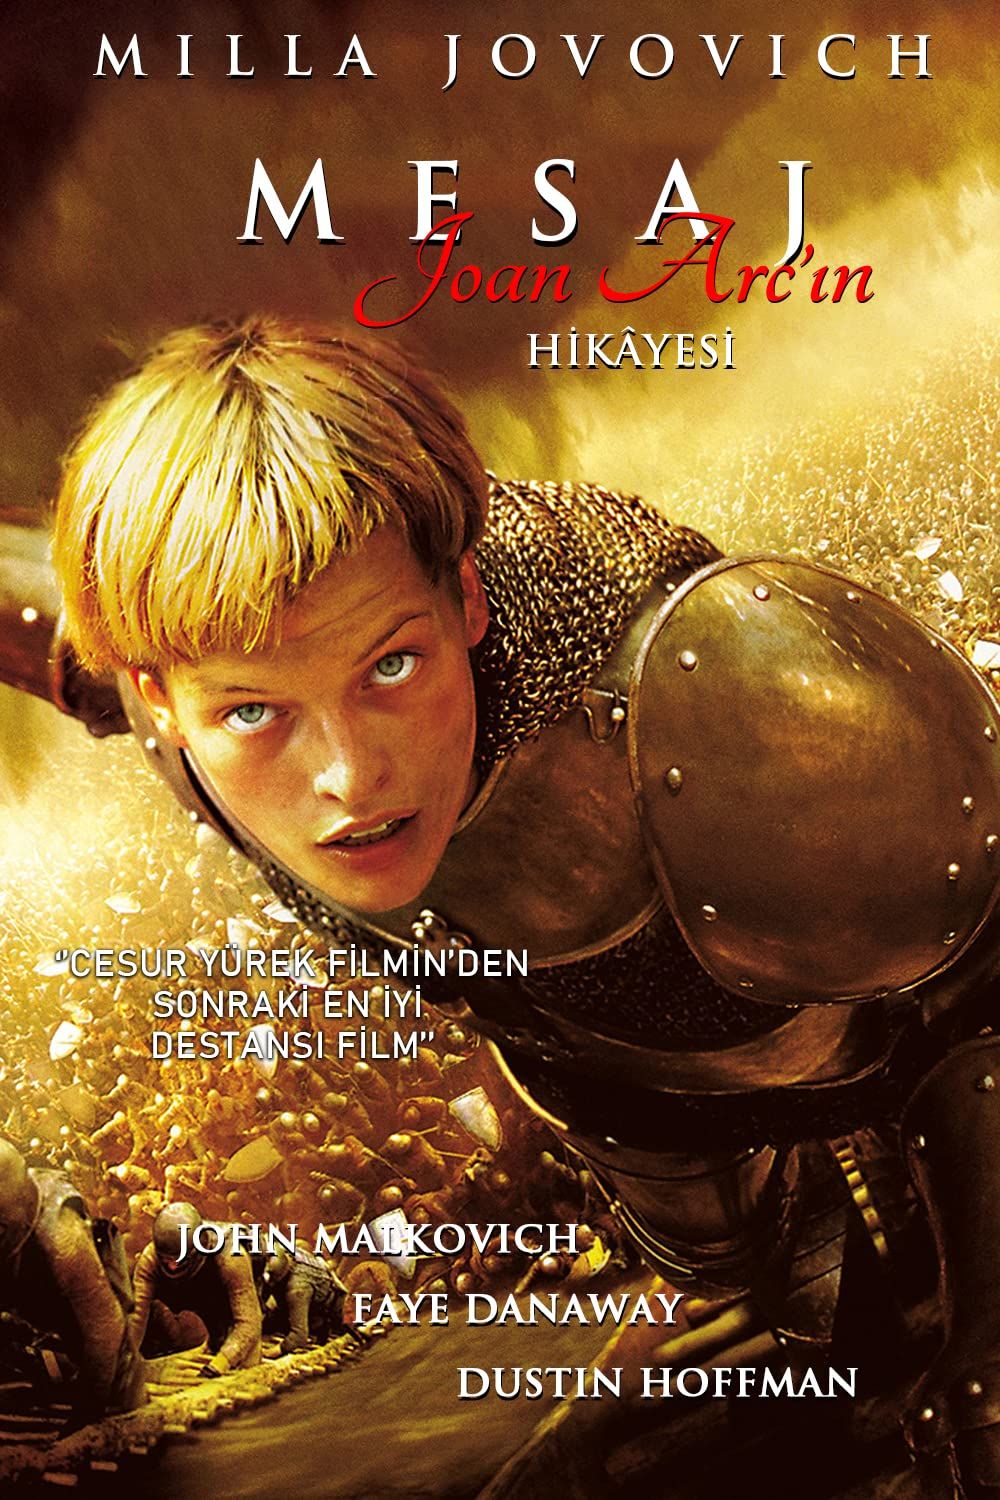 The Messenger: The Story of Joan of Arc (1999) Hindi Dubbed BRRip download full movie